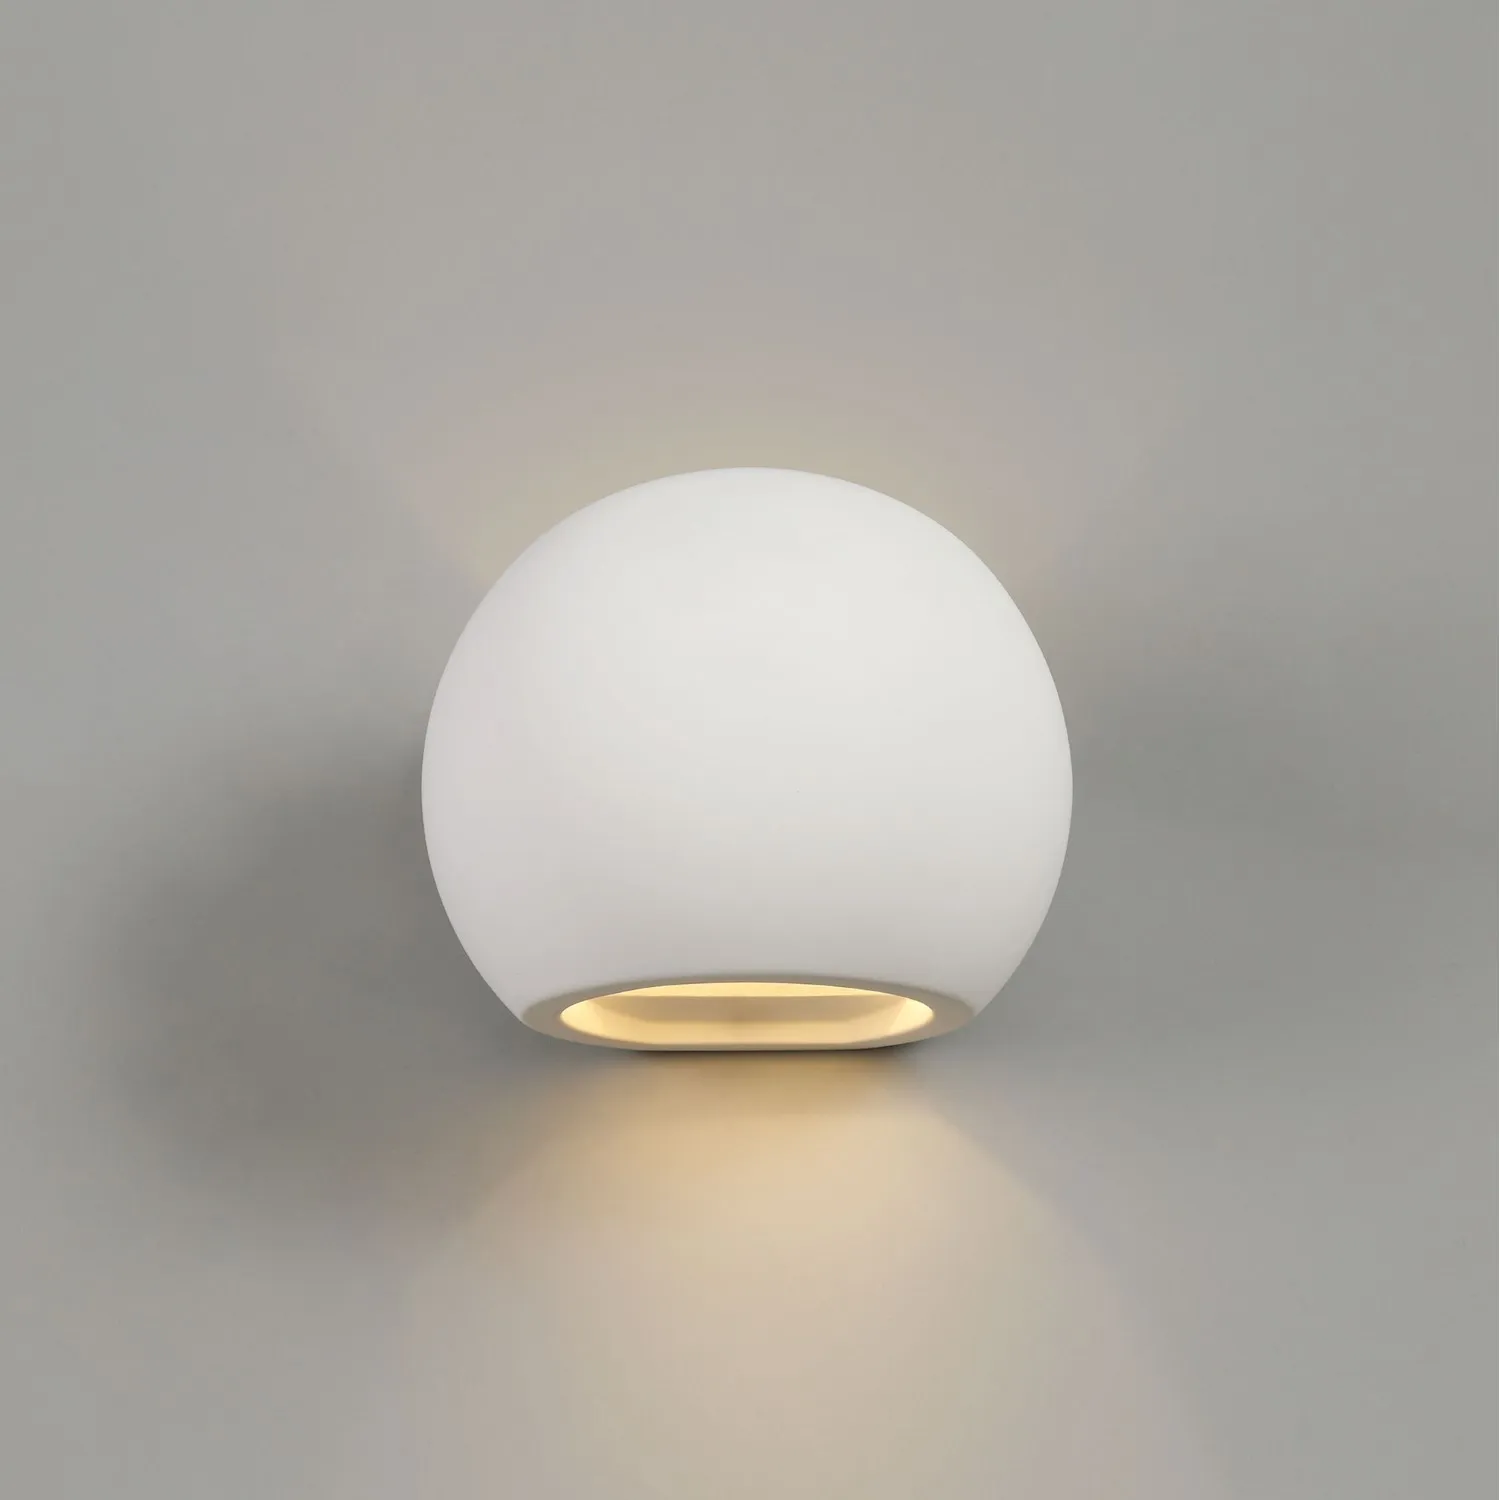 Tilbury Round Ball Up And Down Wall Lamp, 1 x G9, White Paintable Gypsum